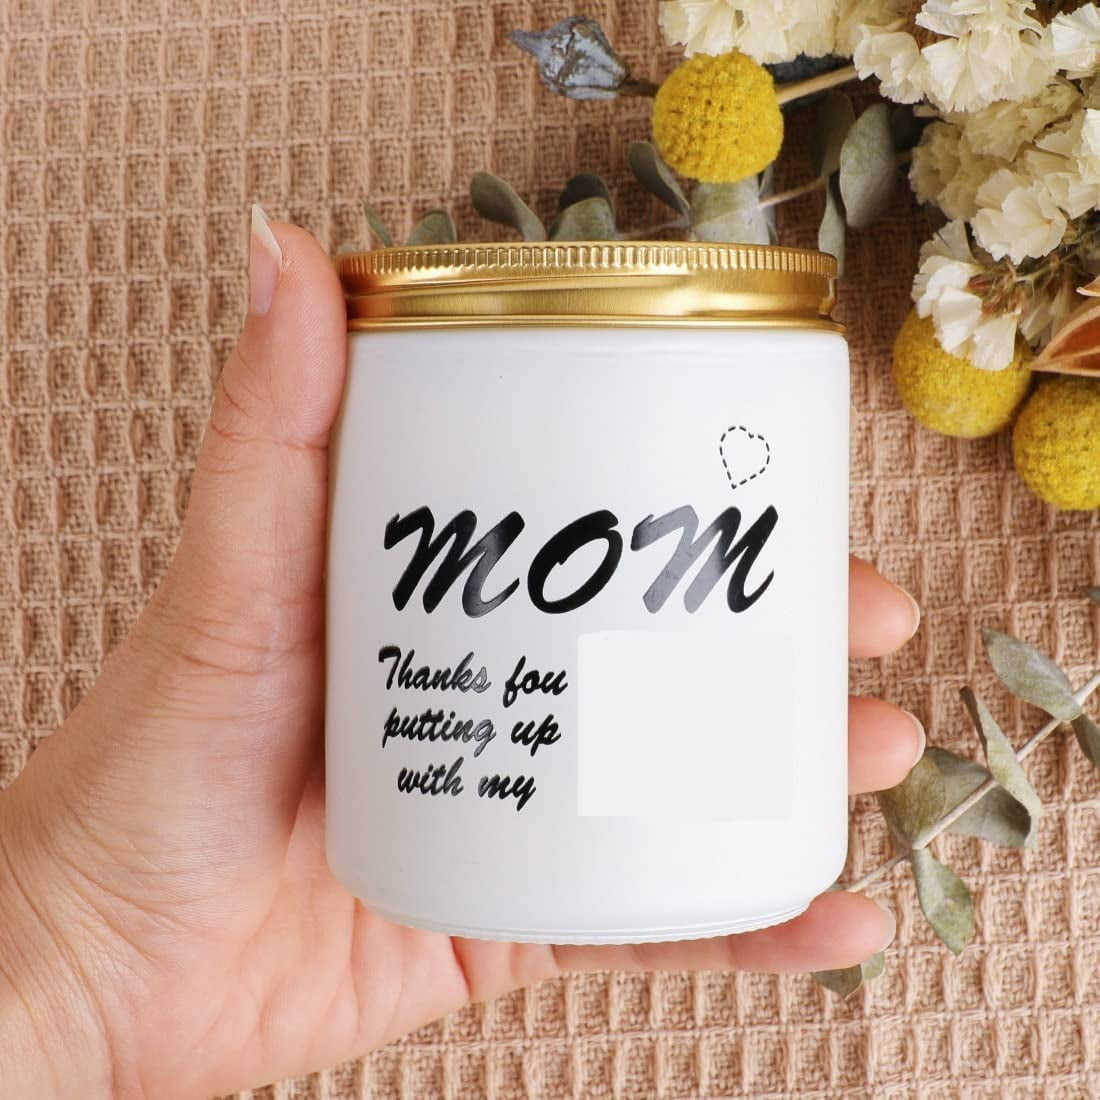  Unique Scented Soy Candle Gifts for Mom from Daughter or Son -  Funny Novelty Thank You Presents for Women on Christmas, Birthdays,  Thanksgiving : Home & Kitchen